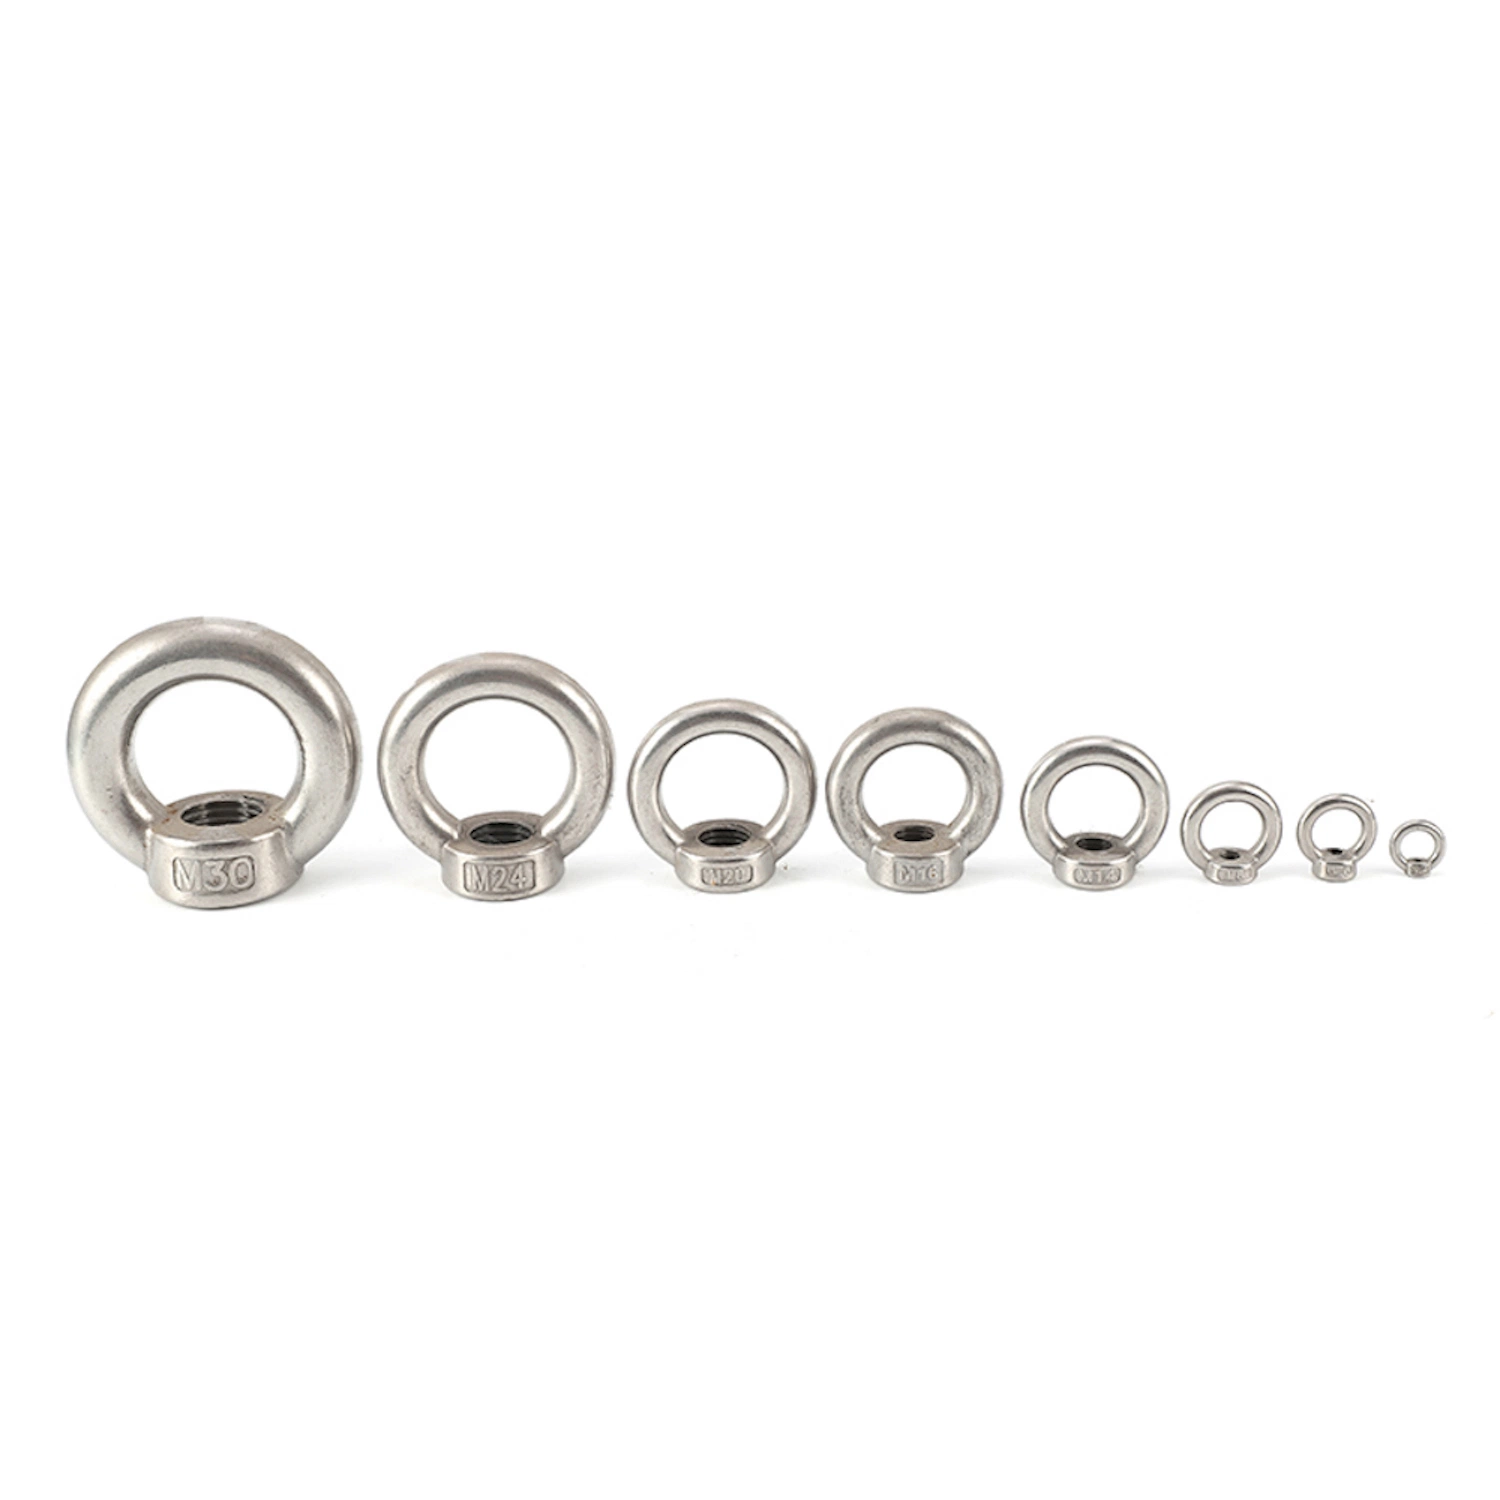 Rigging Eye Nut fastener in Stainless Steel for Wire Rope